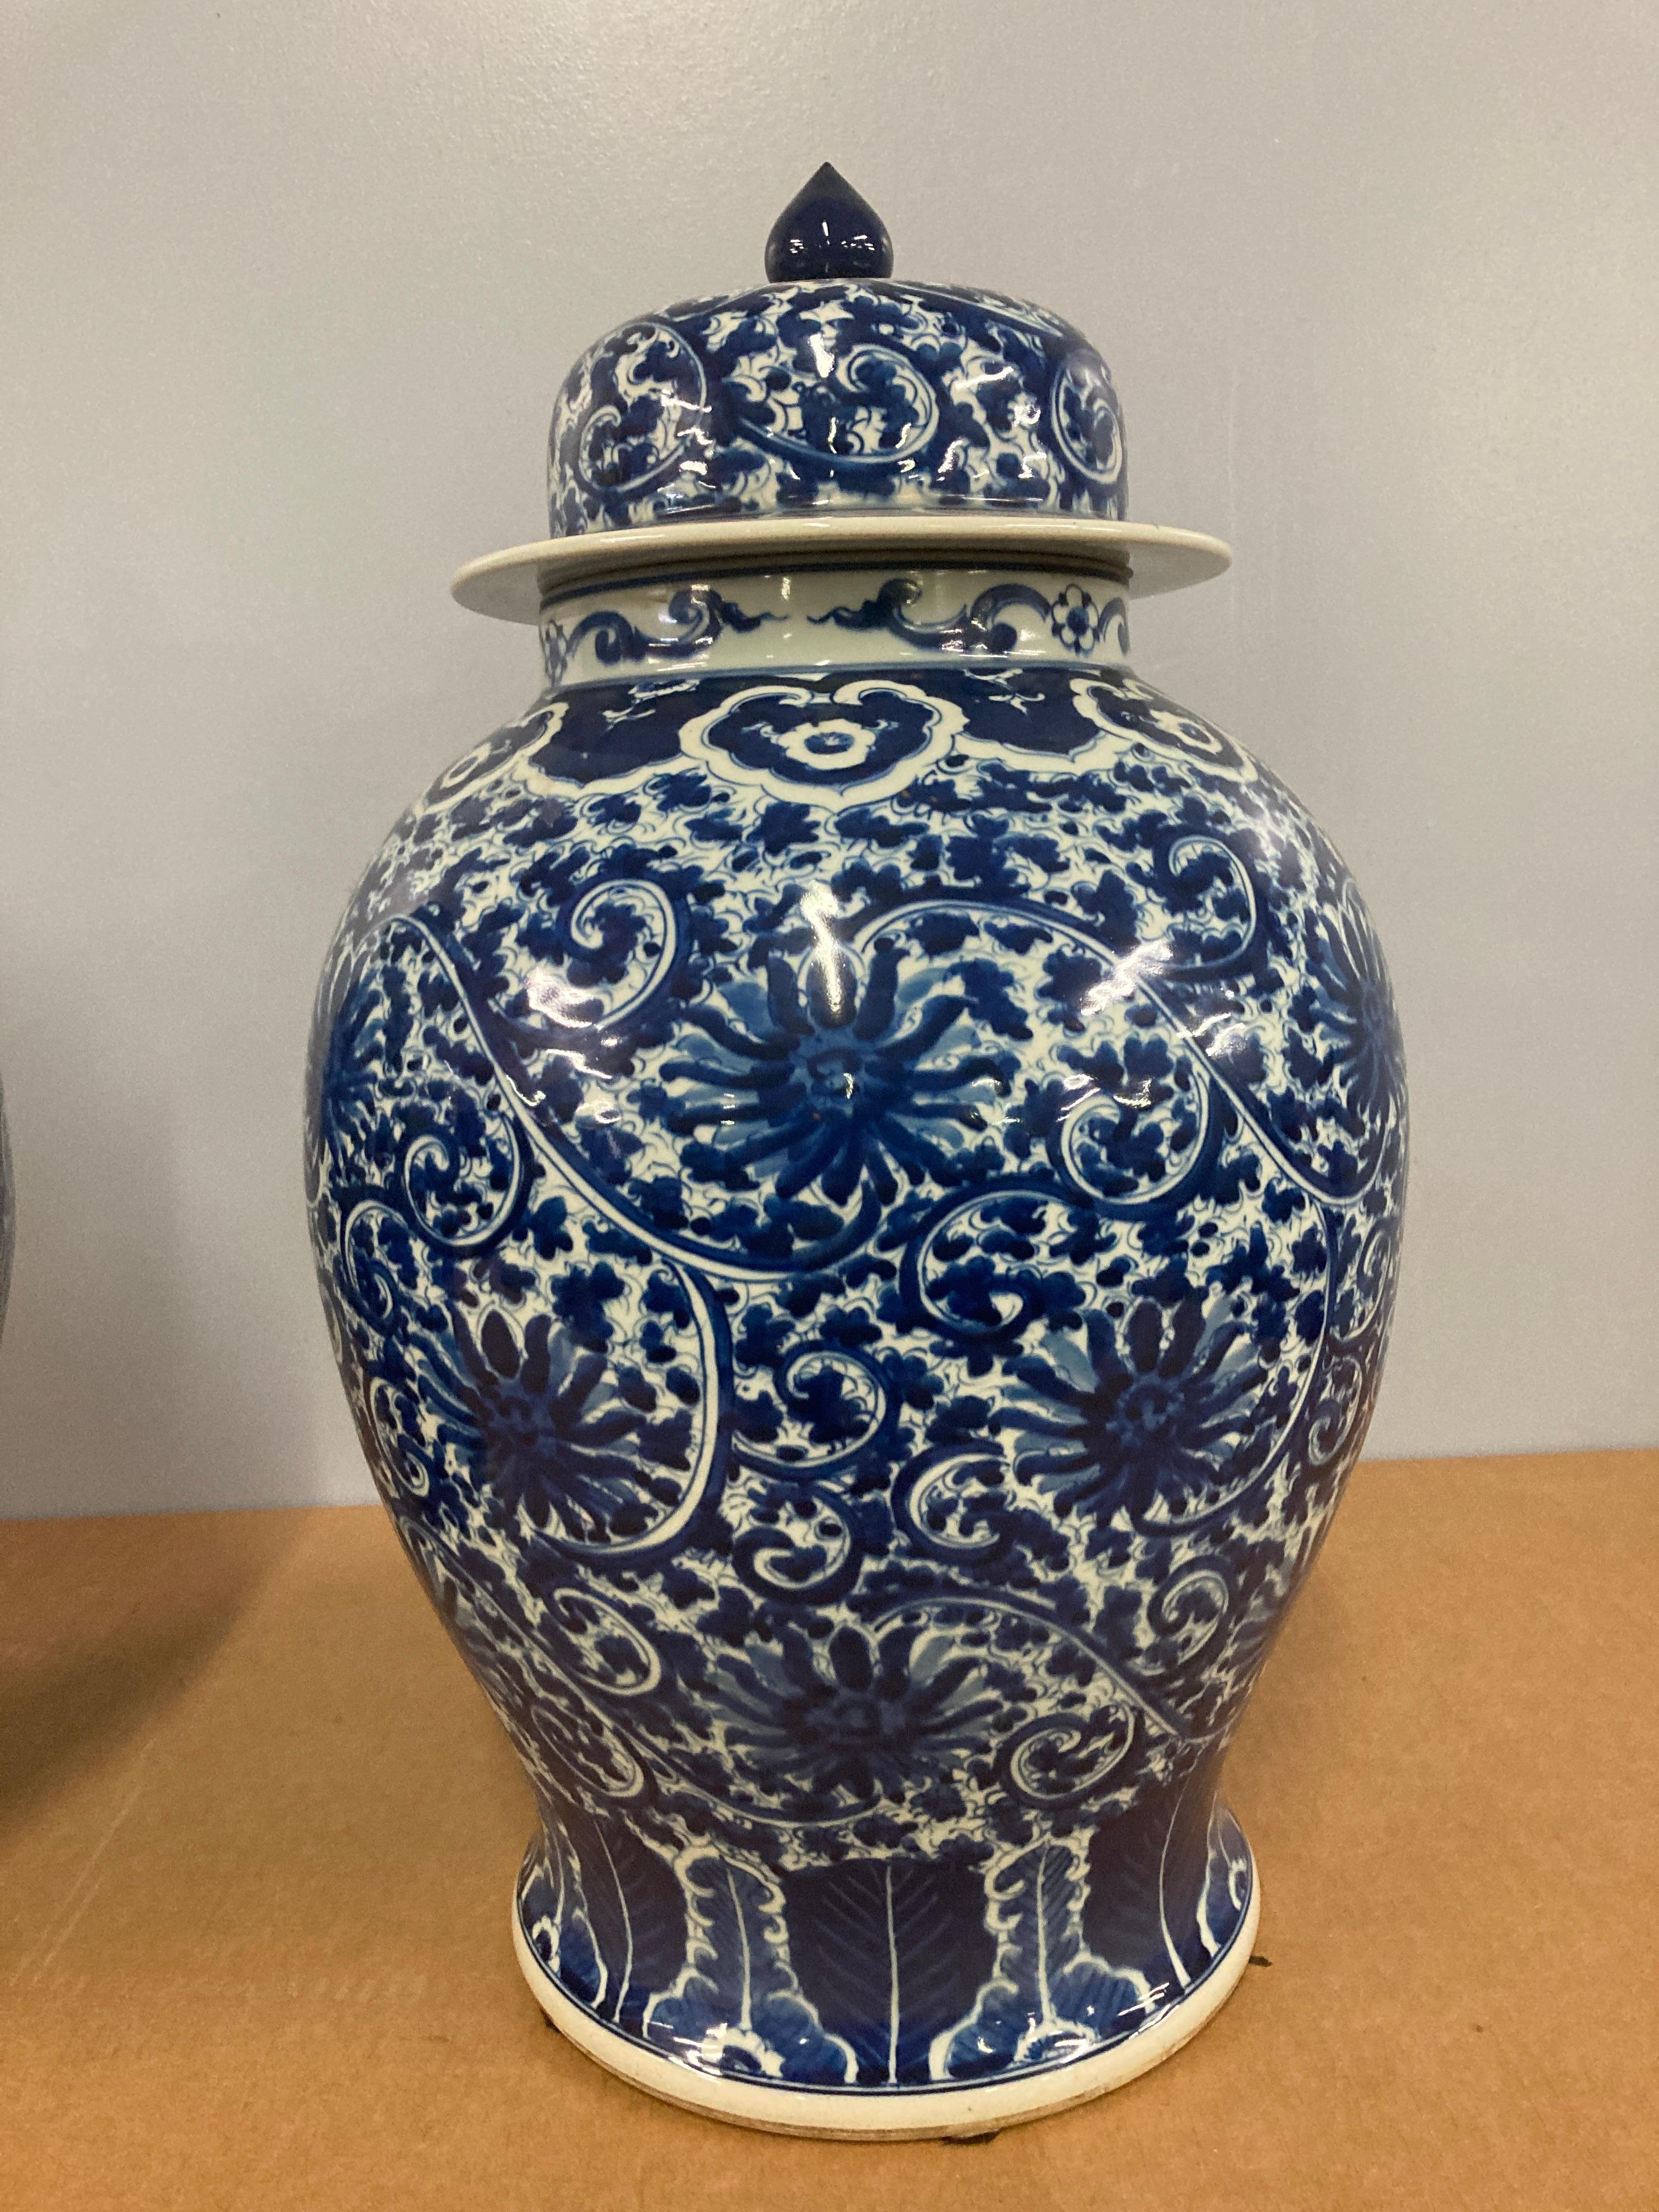 A pair of blue and white Chinese porcelain ginger jars in the Kangi period style, dating from the late 20th century.